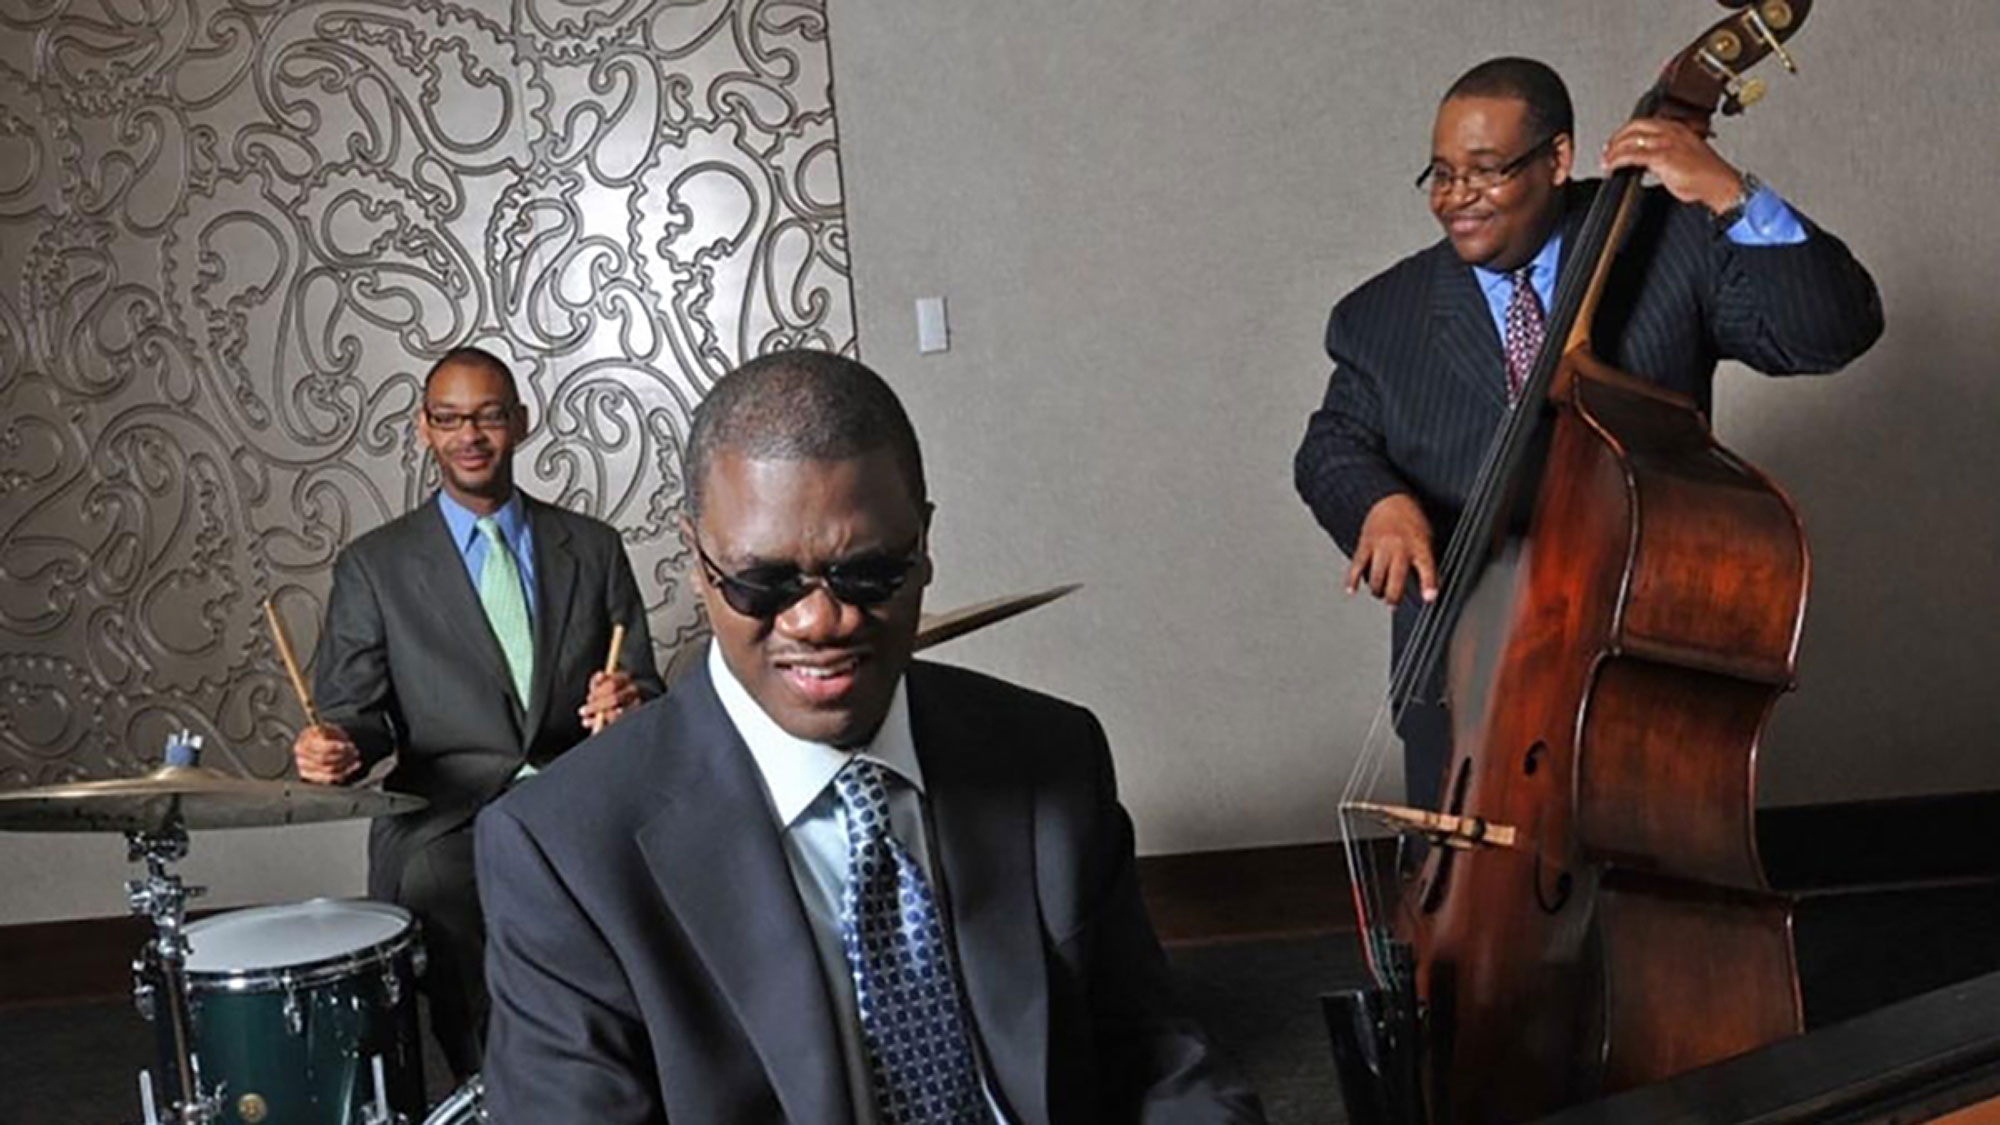 Marcus Roberts Trio Plays His Rhapsody in D with the CSO at Ravinia Festival